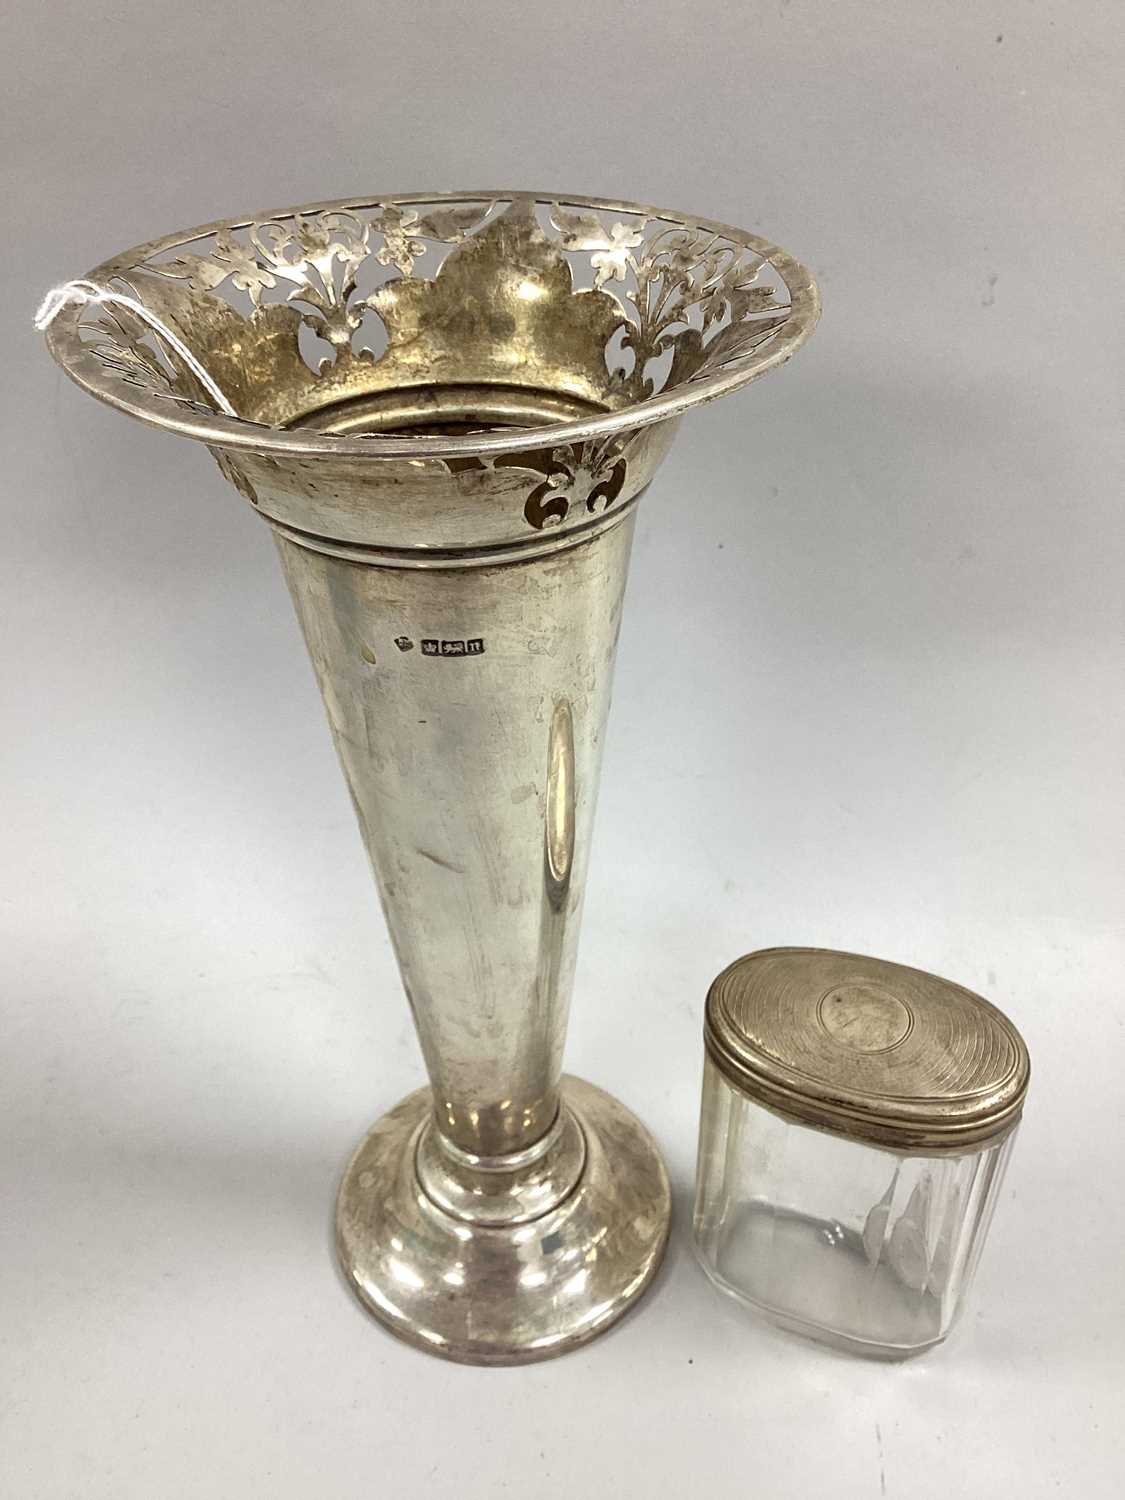 An Edwardian Hallmarked Silver Vase, RMEH, Sheffield 1905, of plain cylindrical form with pierced